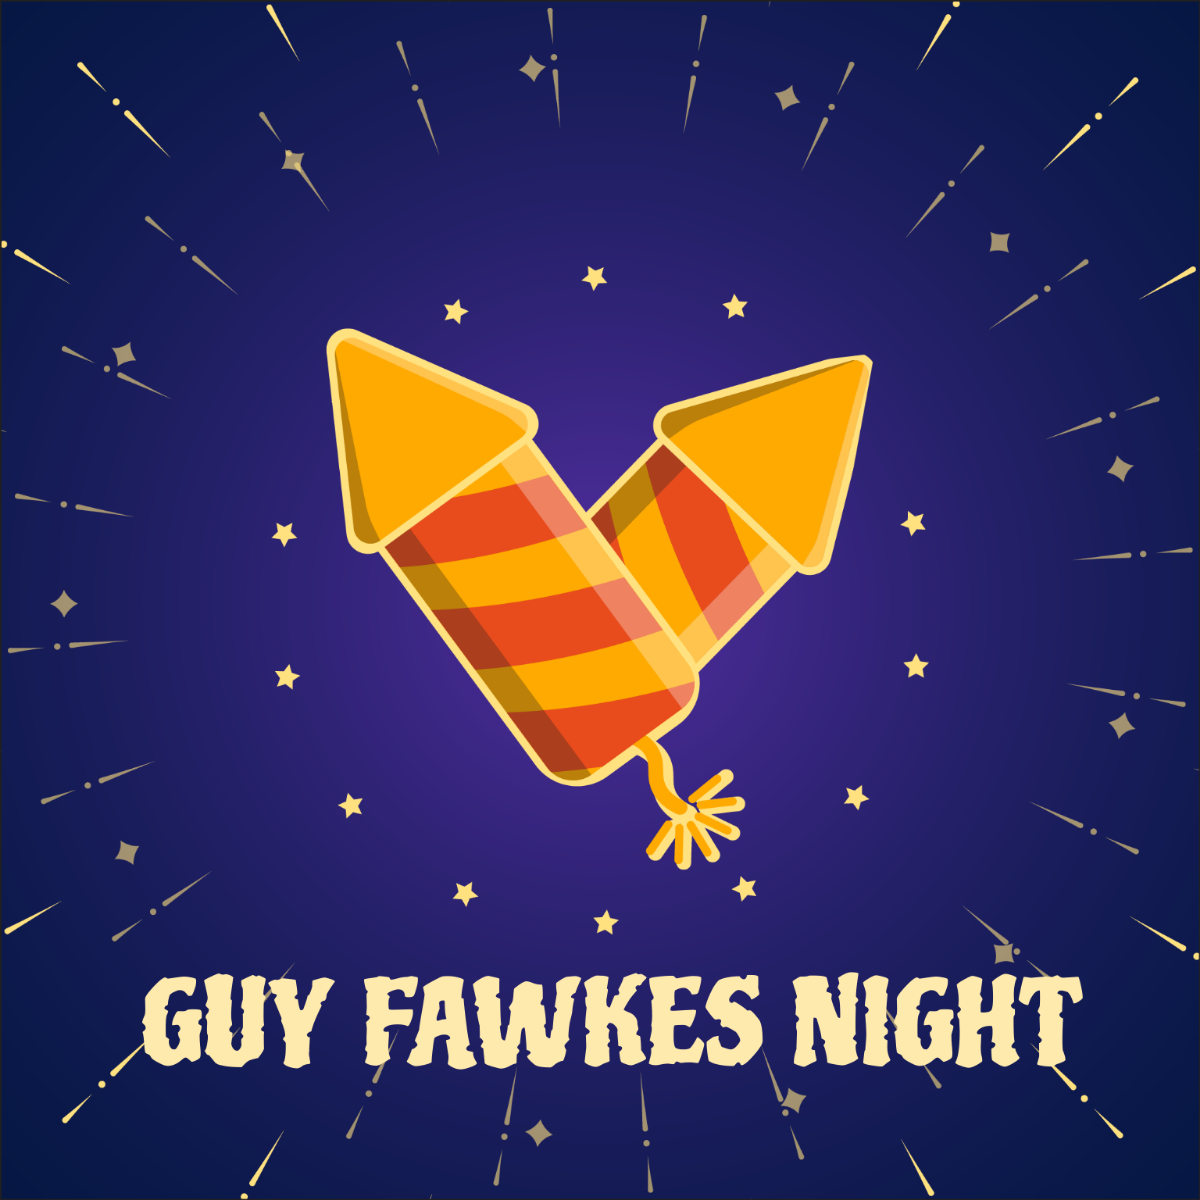 Free Guy Fawkes Night Vector Template